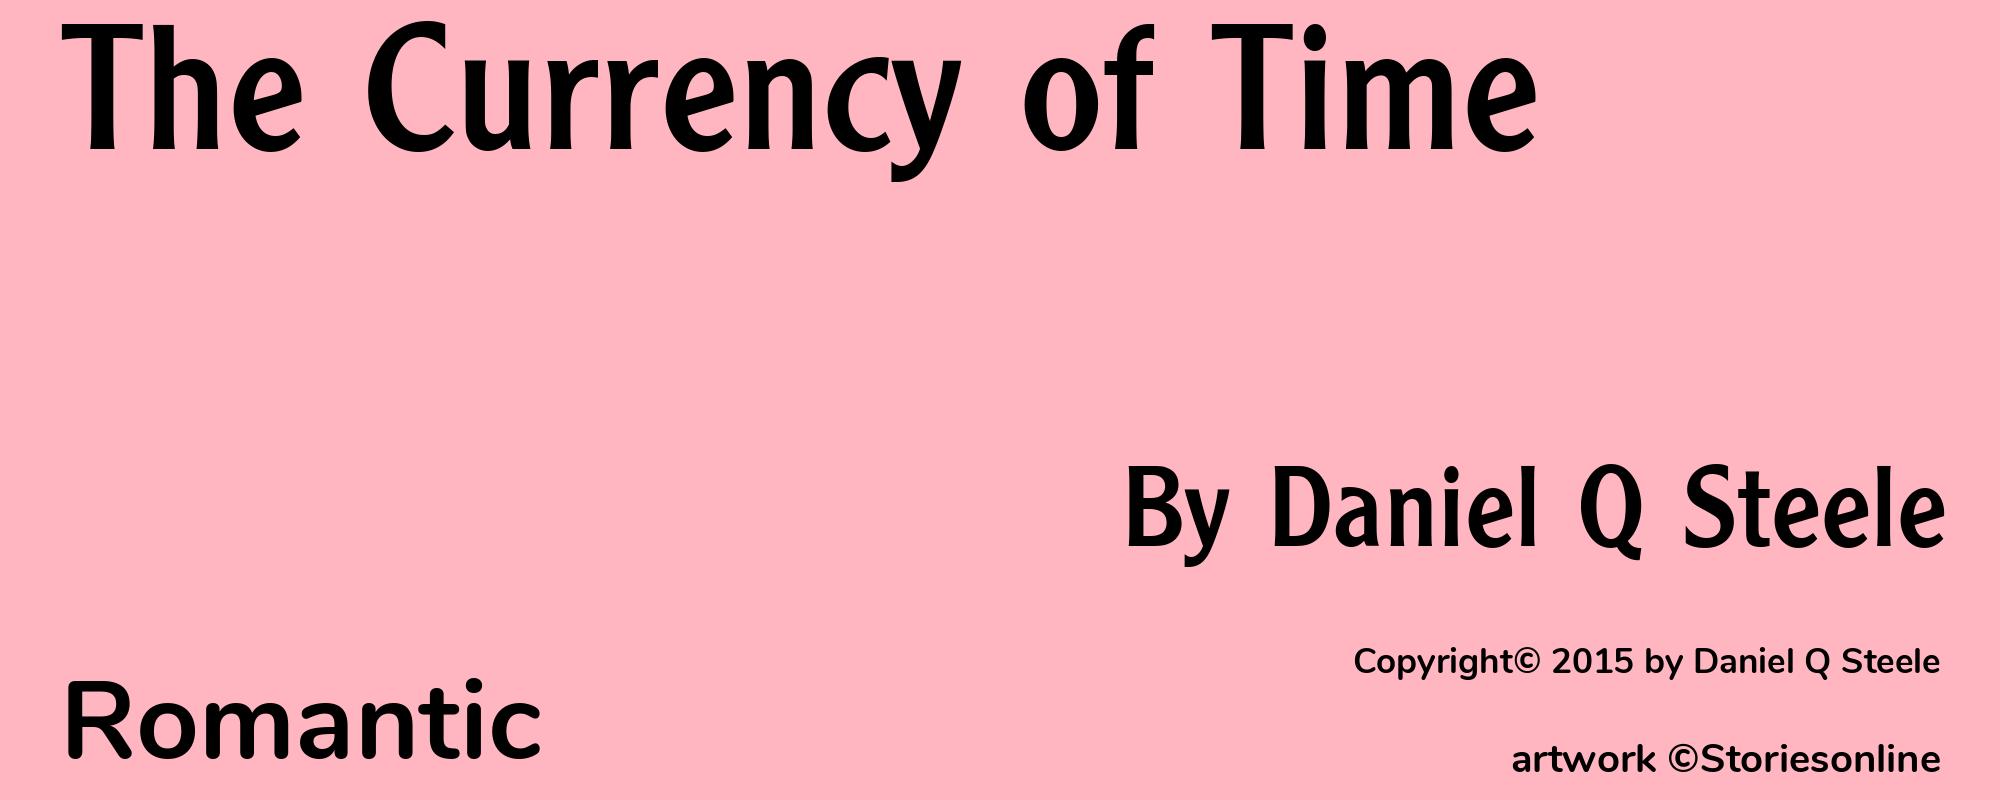 The Currency of Time - Cover